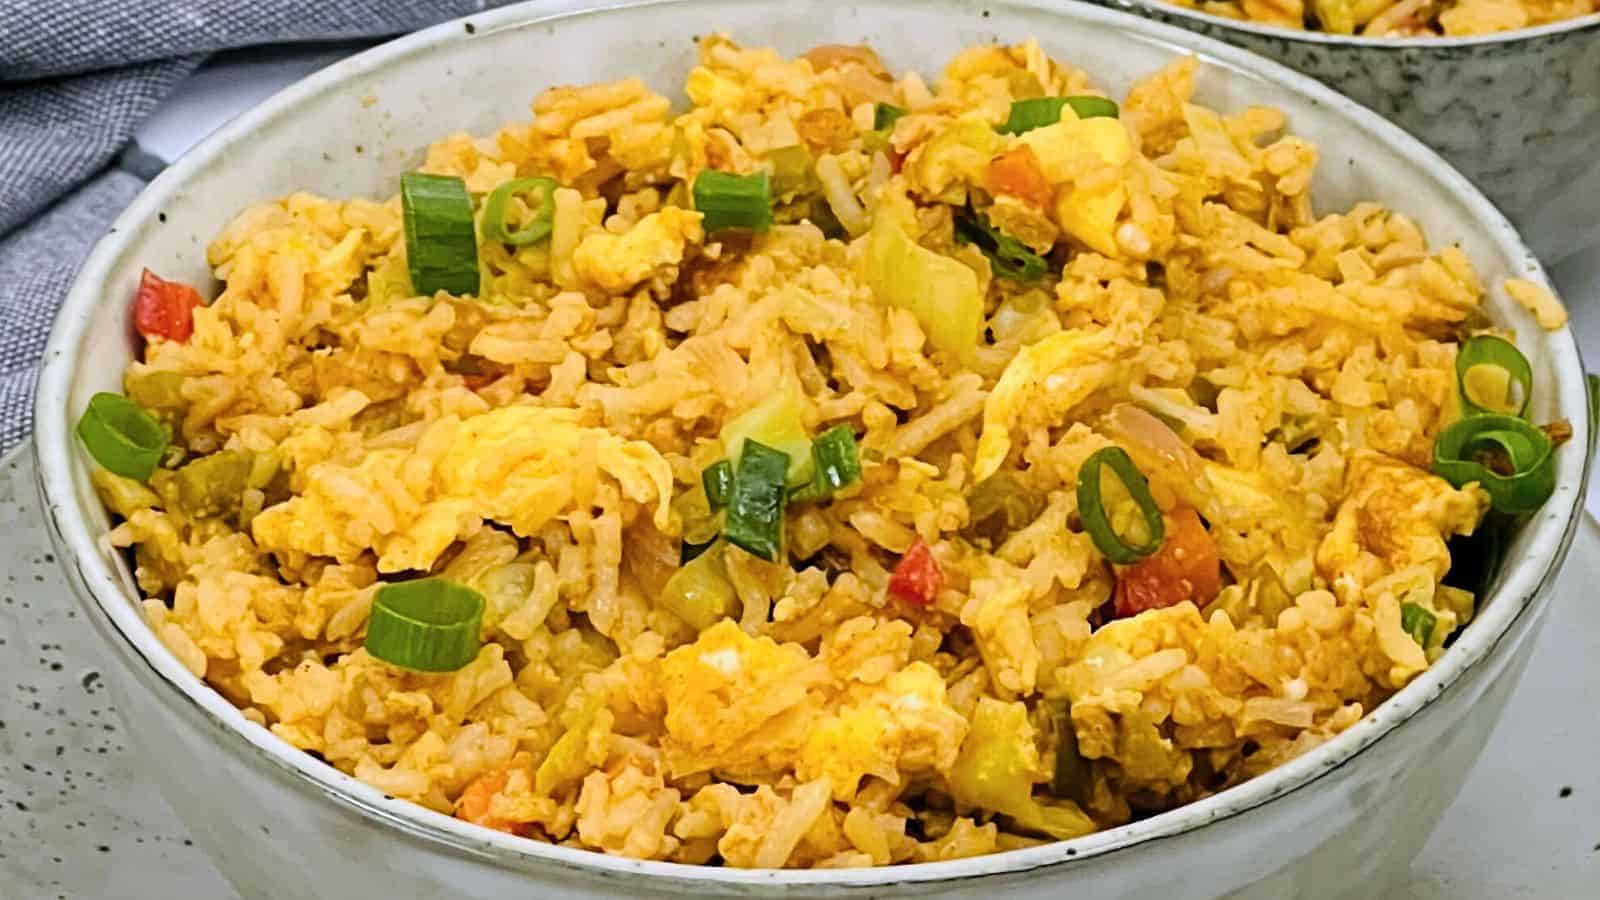 <p>Combine fluffy rice with the richness of eggs and a hint of Indian spices for a simple yet satisfying dish. It’s a quick fix for hunger pangs and a reliable crowd-pleaser. Bringing a touch of India to a global favorite, this comfort food speaks a universal language. Egg Fried Rice is a testament to simple, delicious meals.<br><strong>Get the Recipe: </strong><a href="https://easyindiancookbook.com/egg-fried-rice/?utm_source=msn&utm_medium=page&utm_campaign=">Egg Fried Rice</a></p>